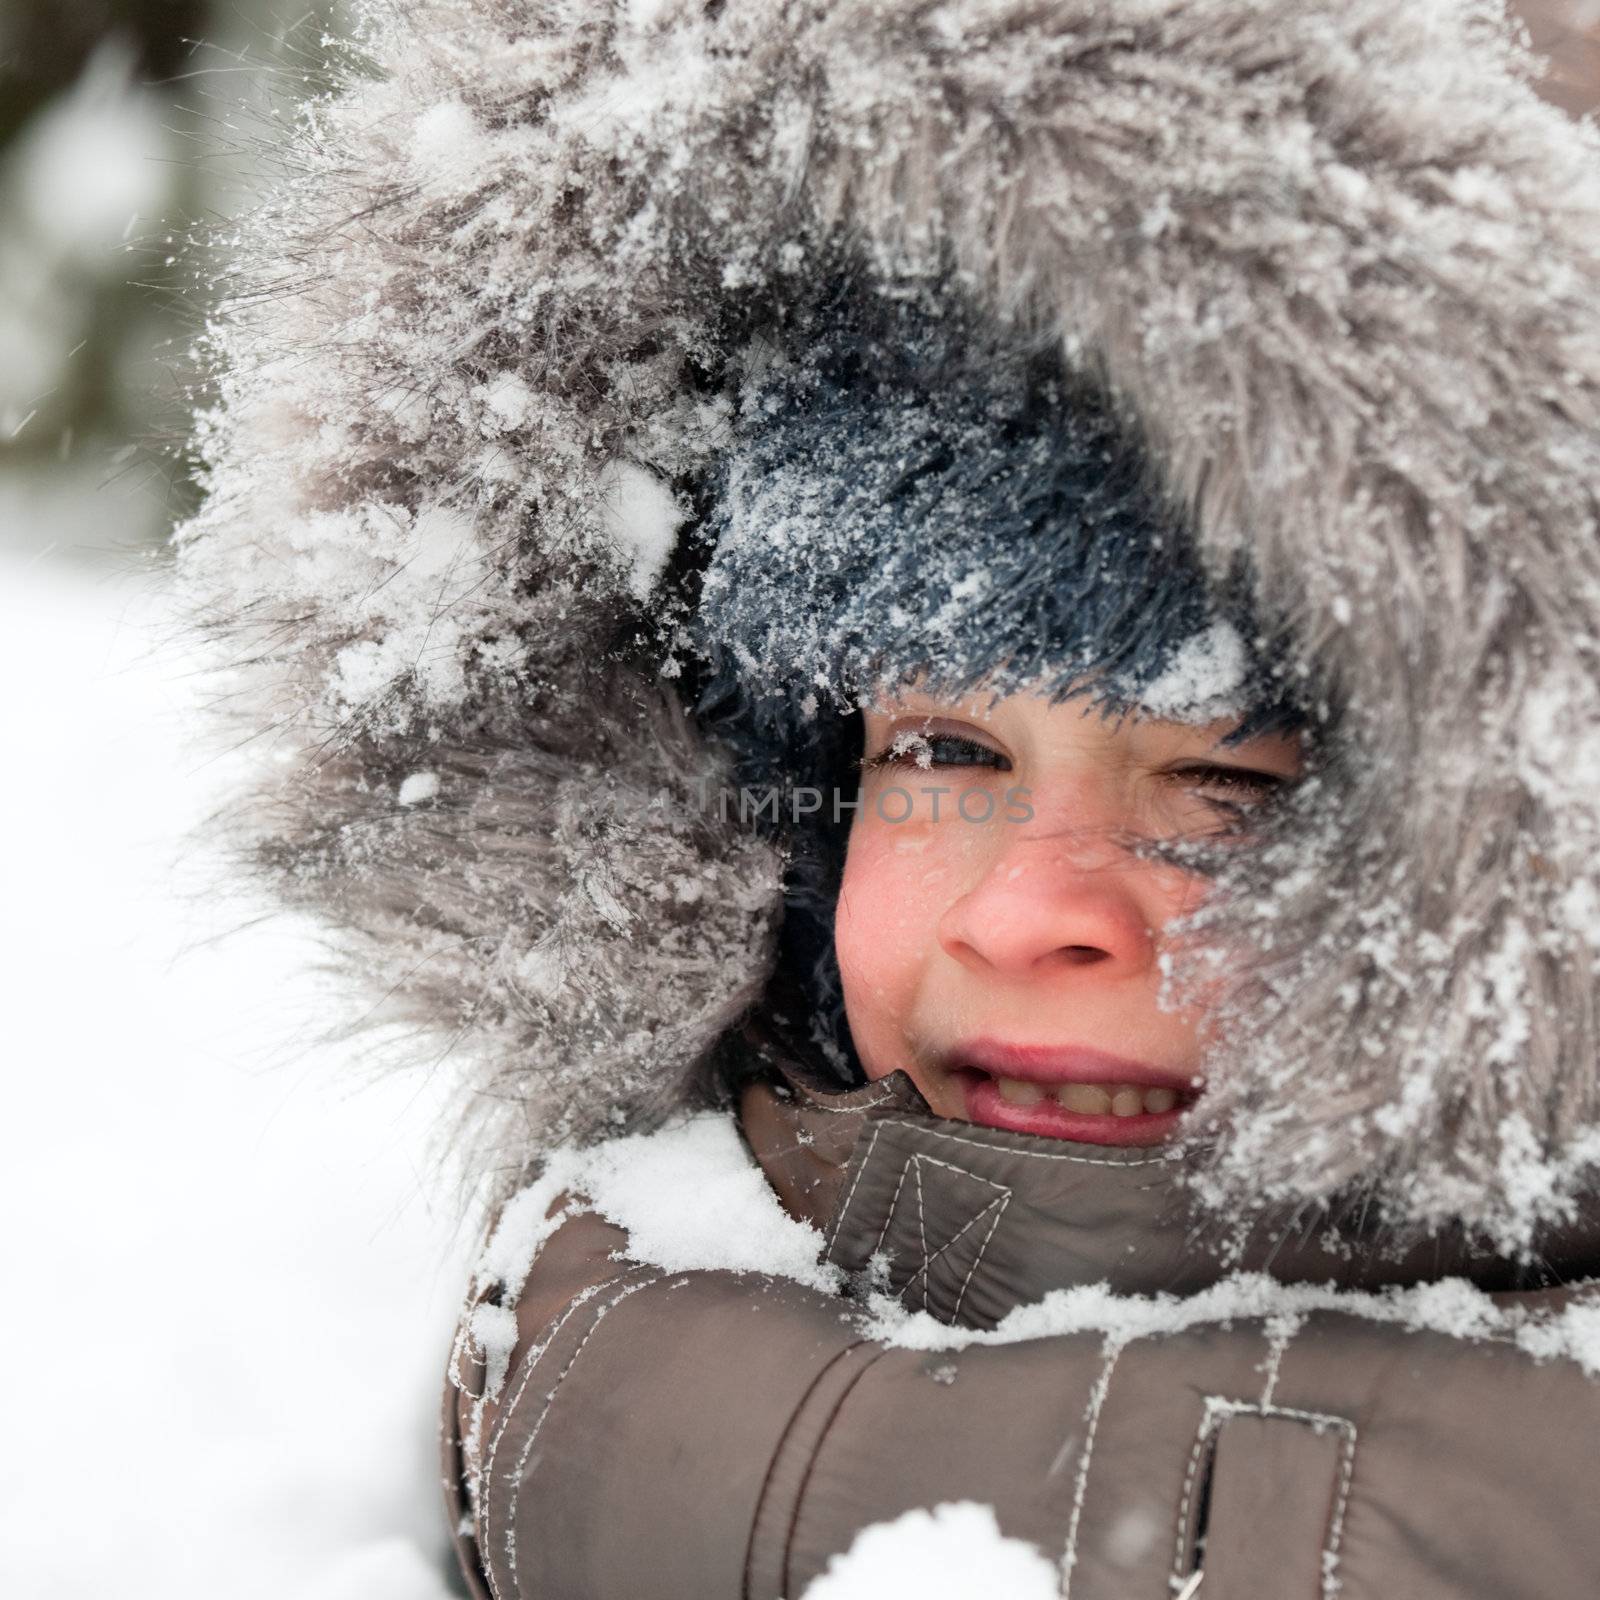 Young boy wearing winter jacket with furry hood playing in snow